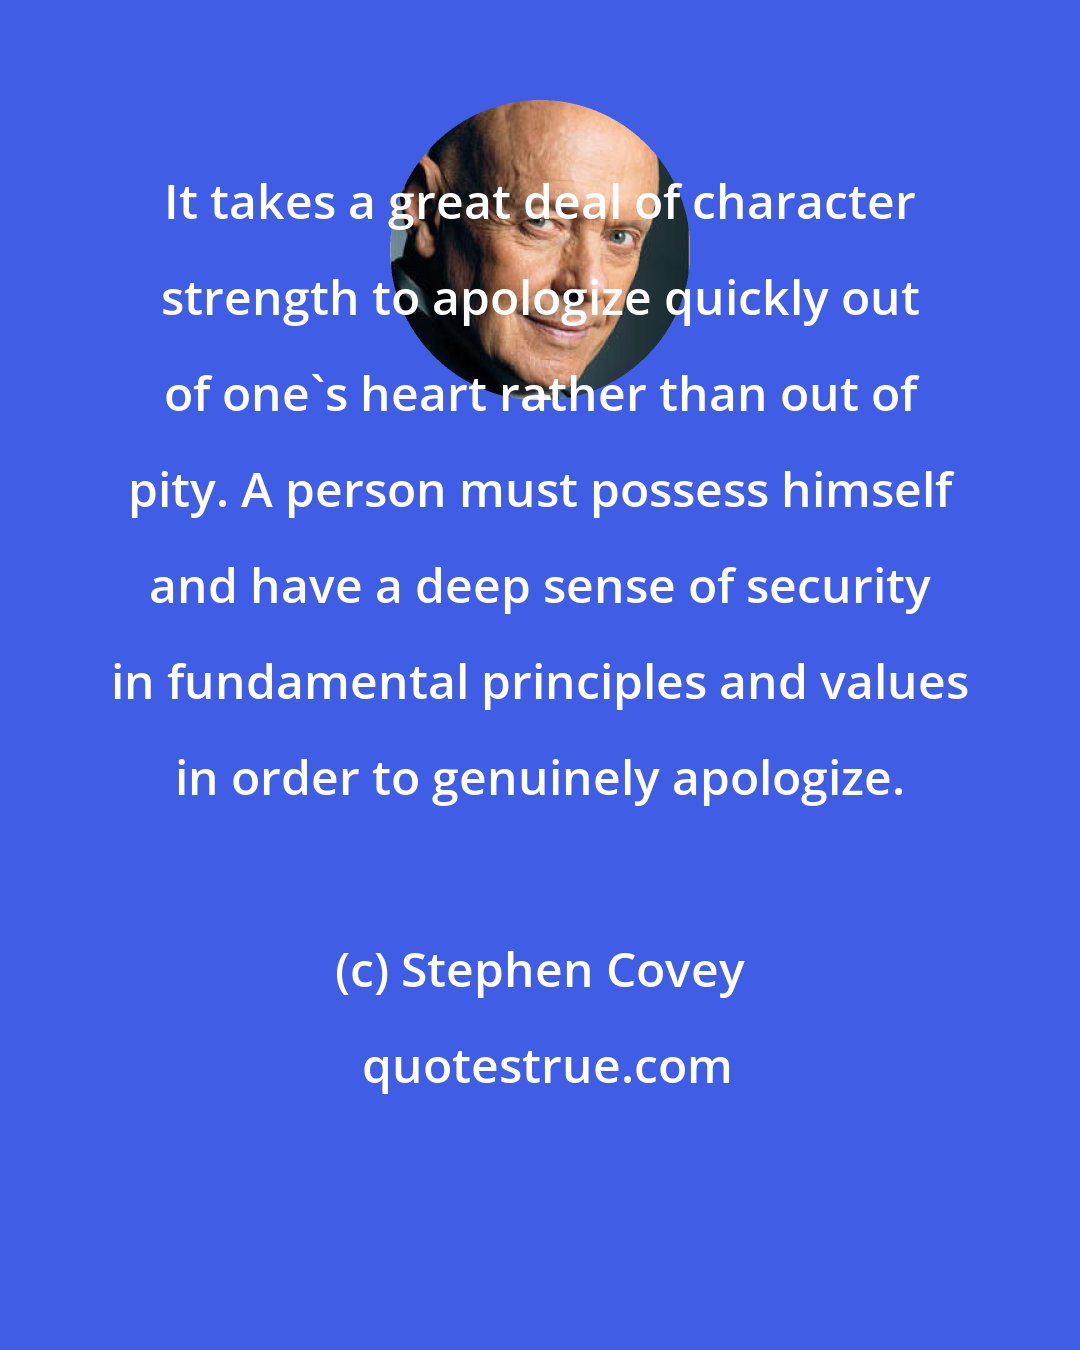 Stephen Covey: It takes a great deal of character strength to apologize quickly out of one's heart rather than out of pity. A person must possess himself and have a deep sense of security in fundamental principles and values in order to genuinely apologize.